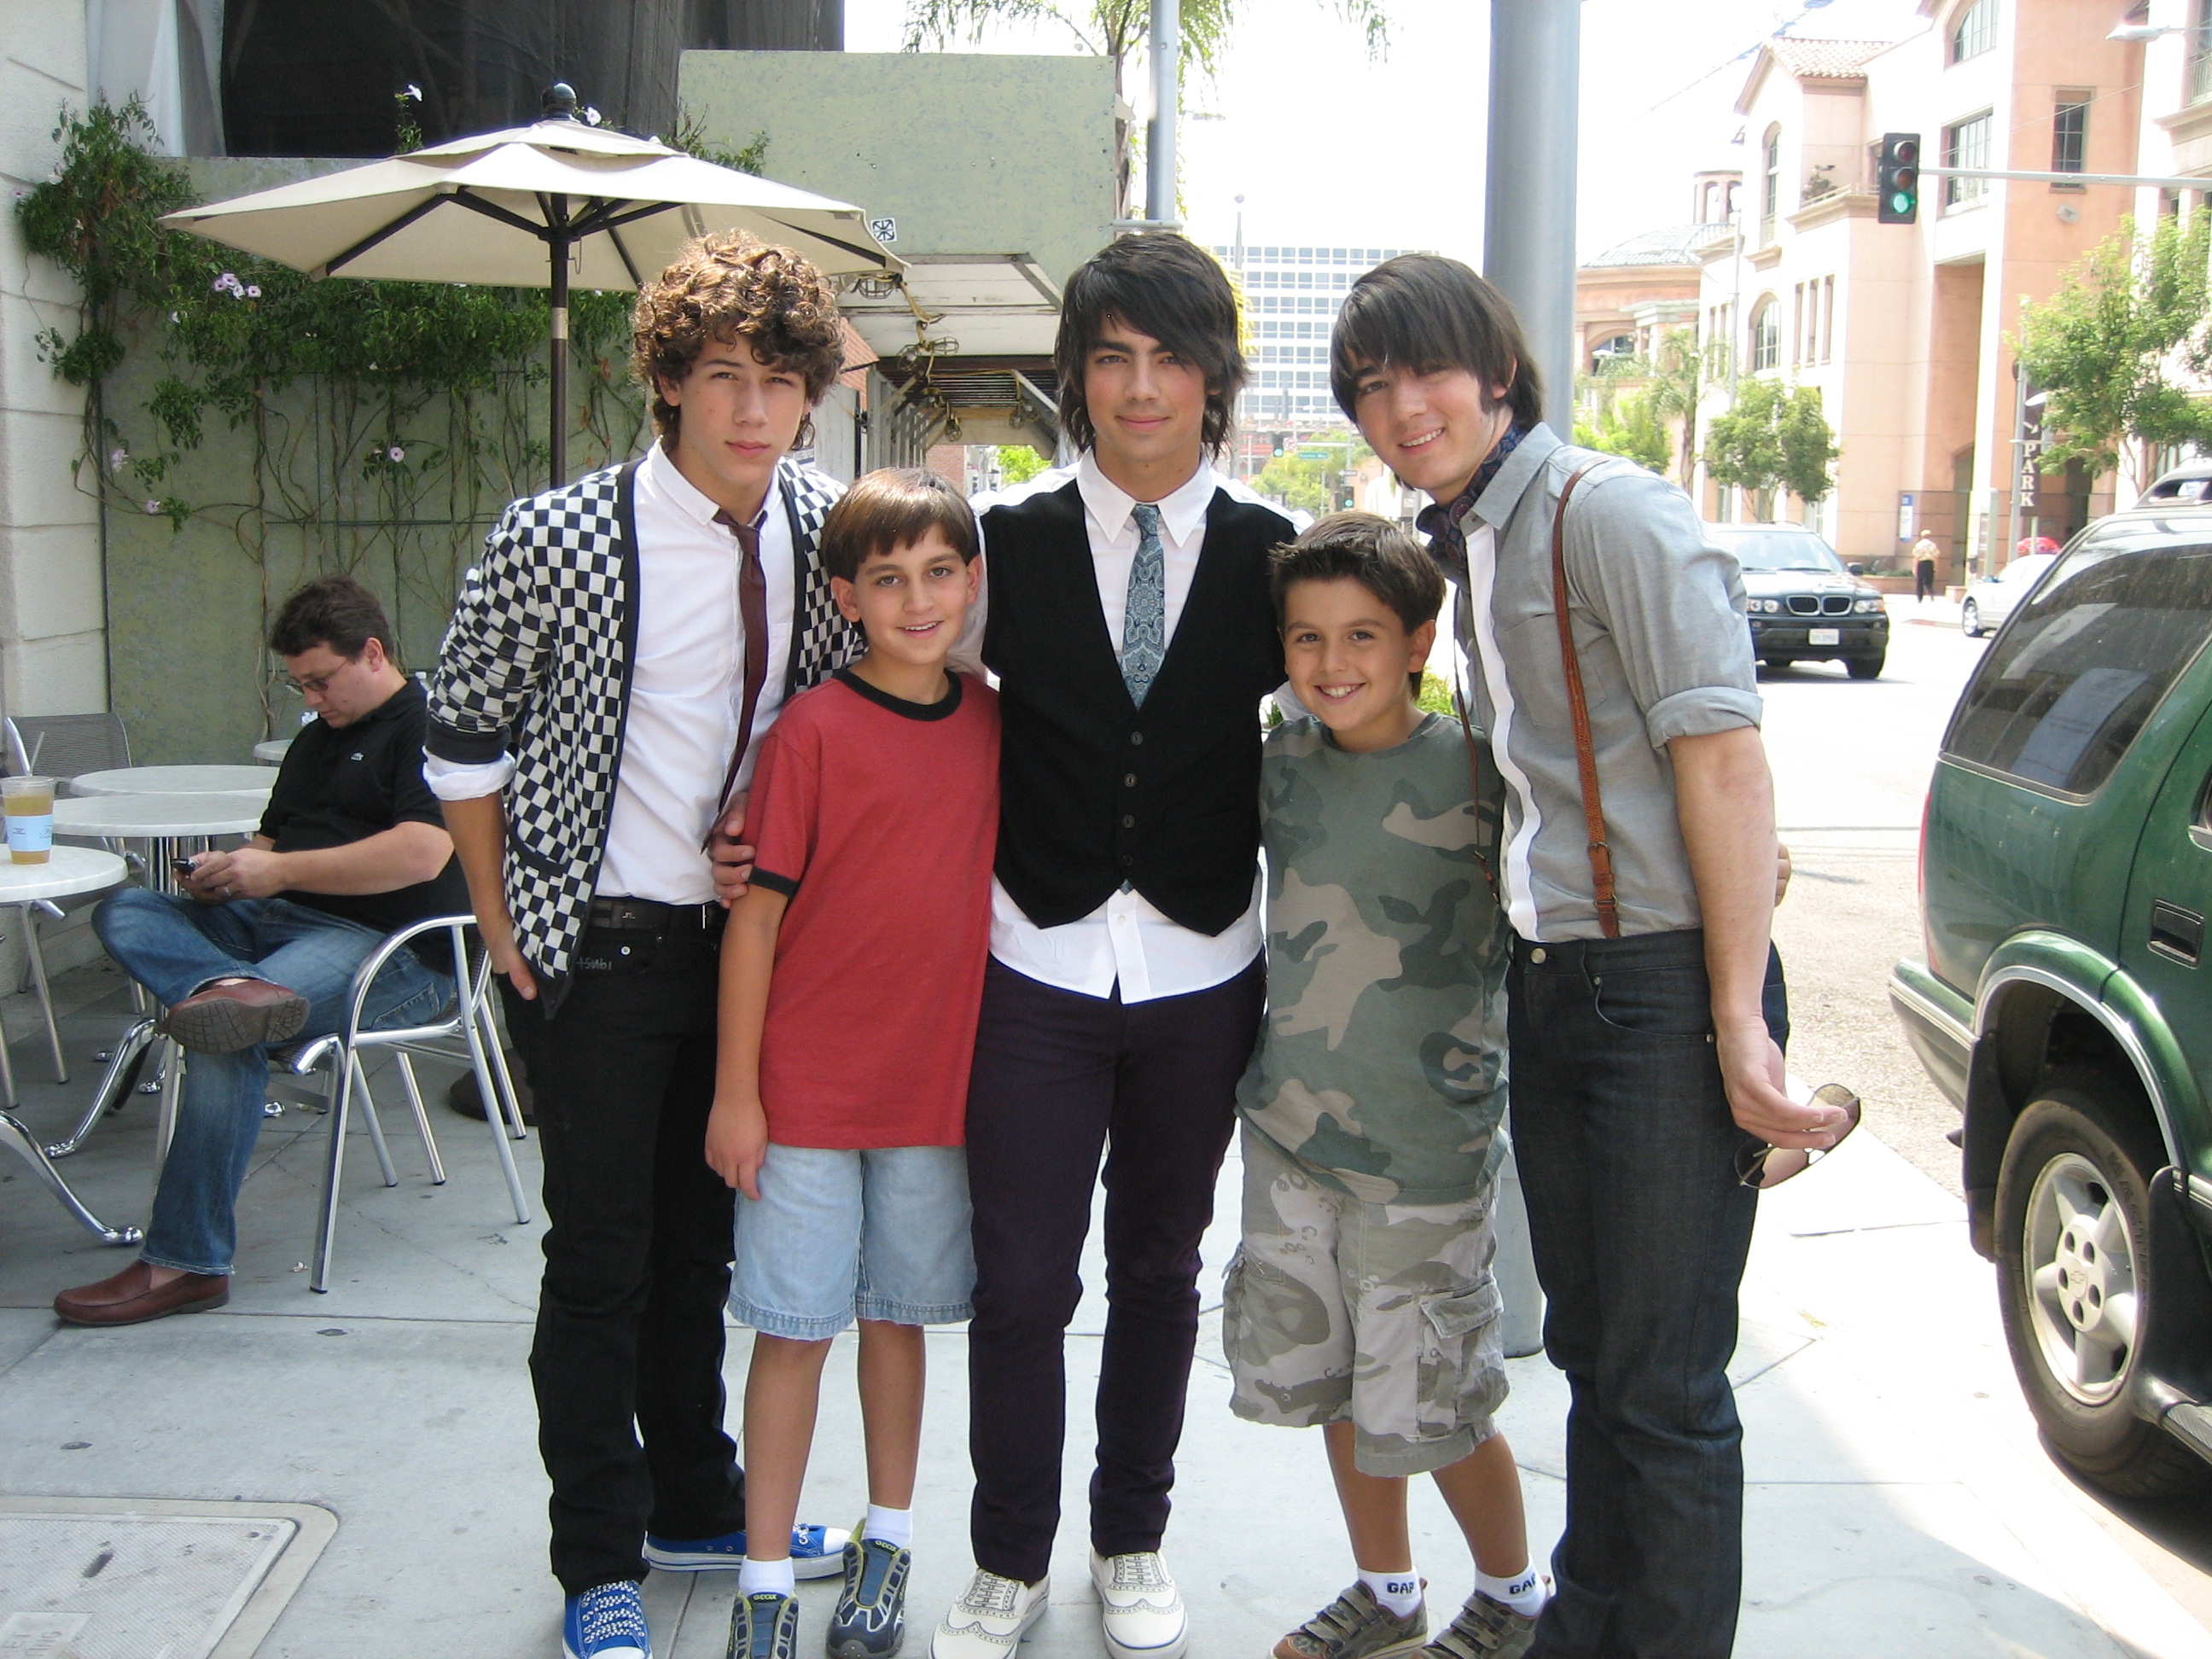 Preston and his brother Tyler with The Jonas Brothers